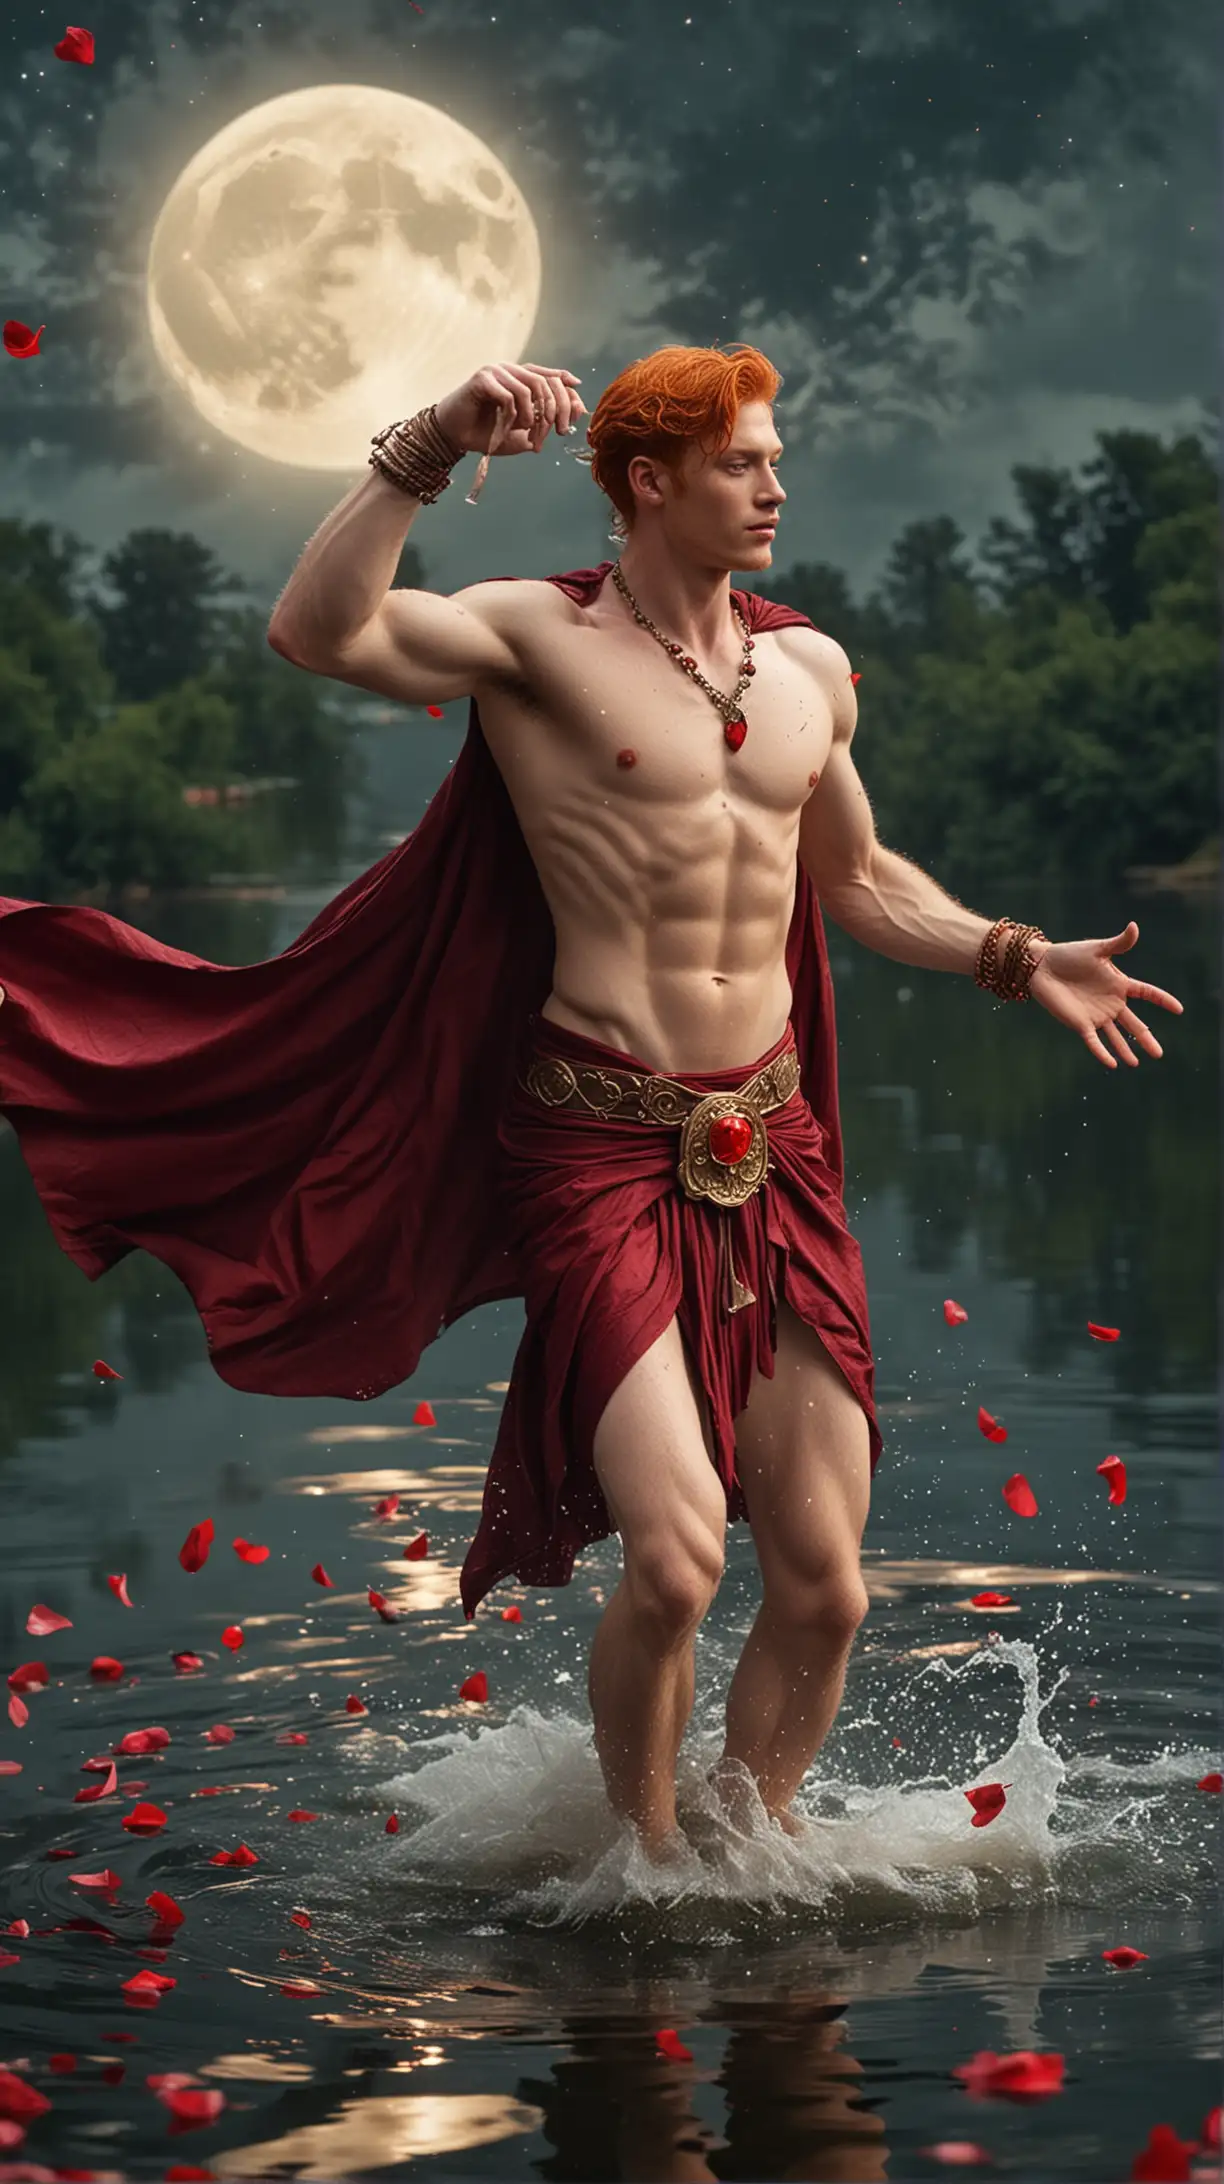 A handsome 1950s redhead drenched shirtless warrior mage donning only his wine red cape, ruby bracelets and loincloth. He is flying over a quiet lake. Rose petals swirling around him as he soar into the full moon night